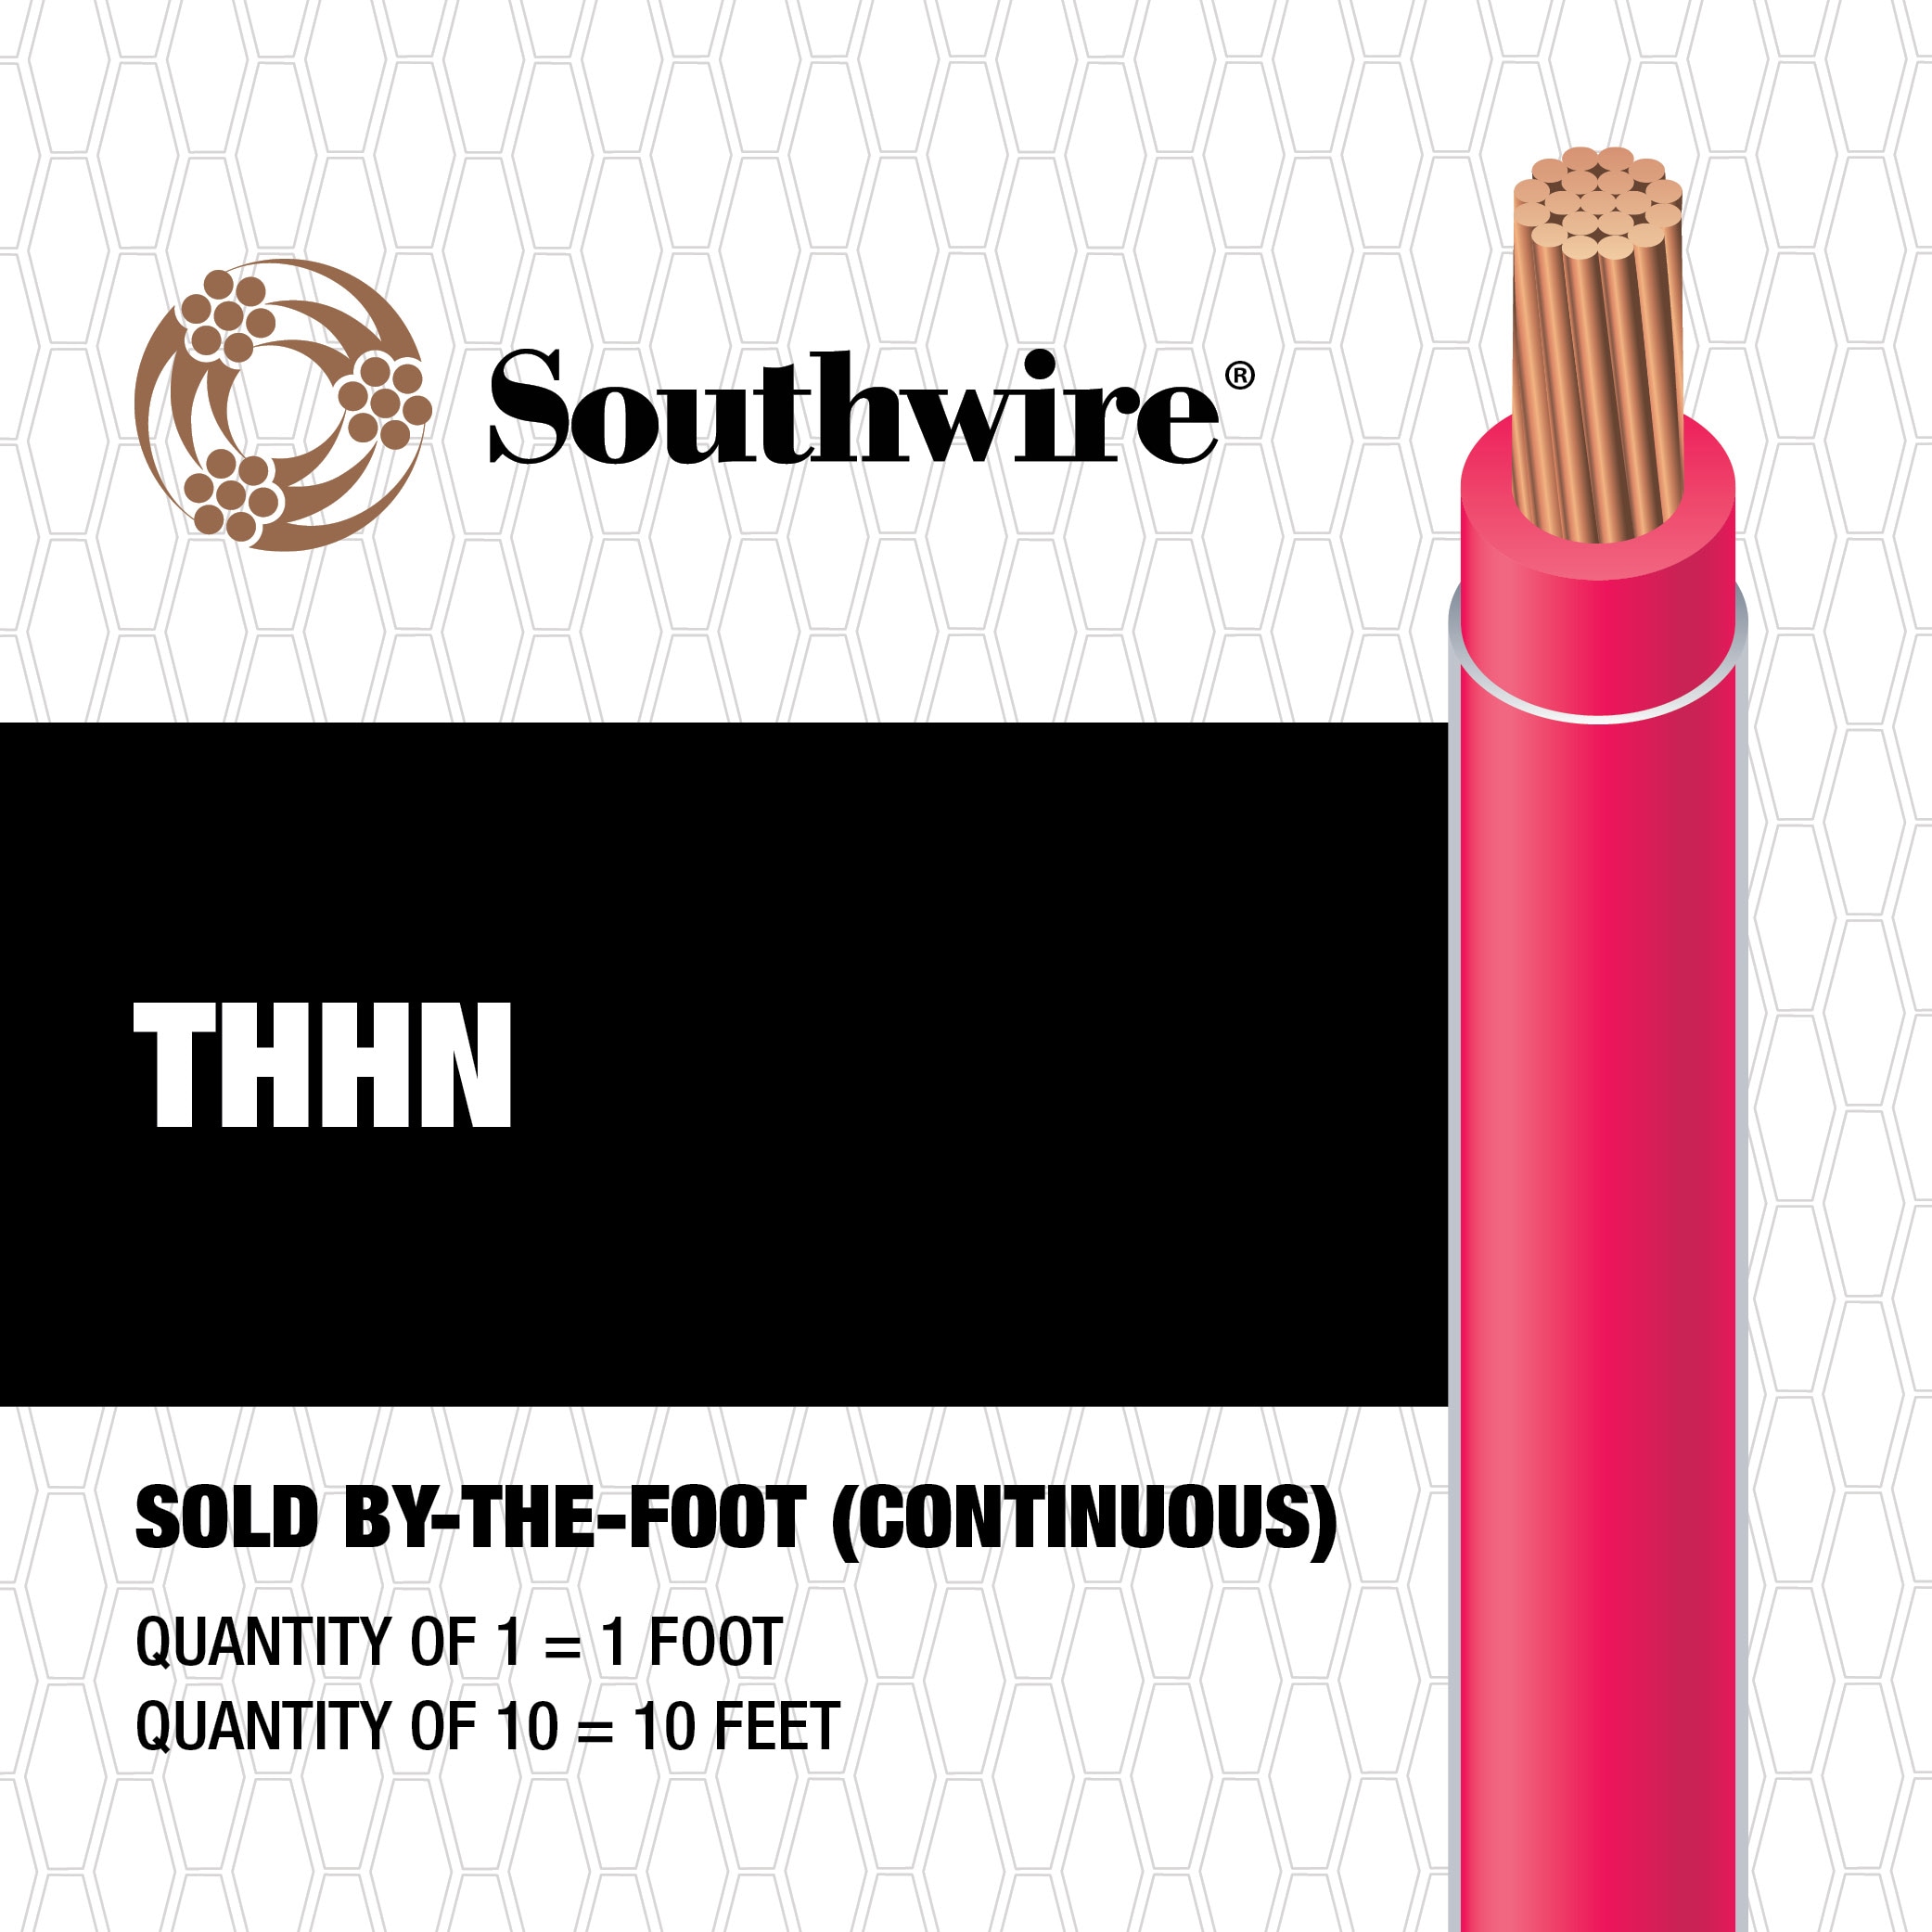 Southwire 500-ft 18-AWG Stranded Yellow Copper Tffn Wire (By-the